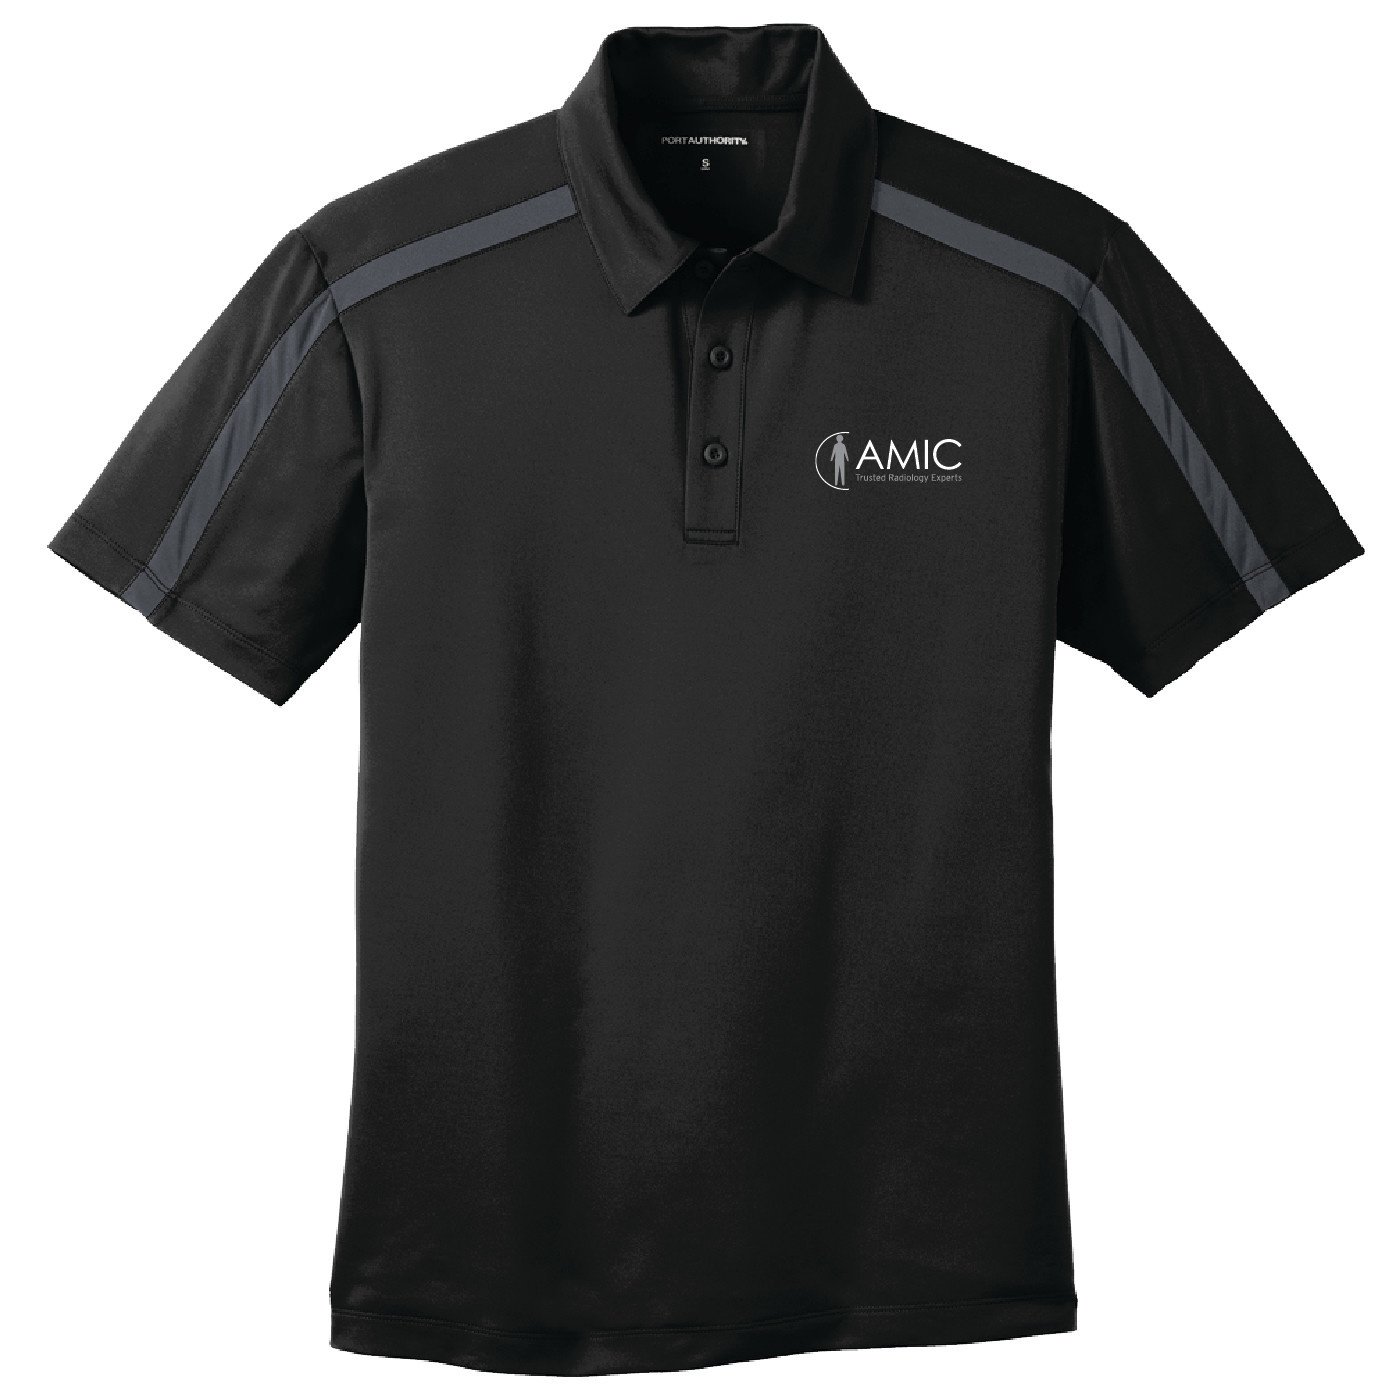 Port Authority Port Authority Silk Touch Performance Colorblock Stripe Polo (Black/Steel Grey)